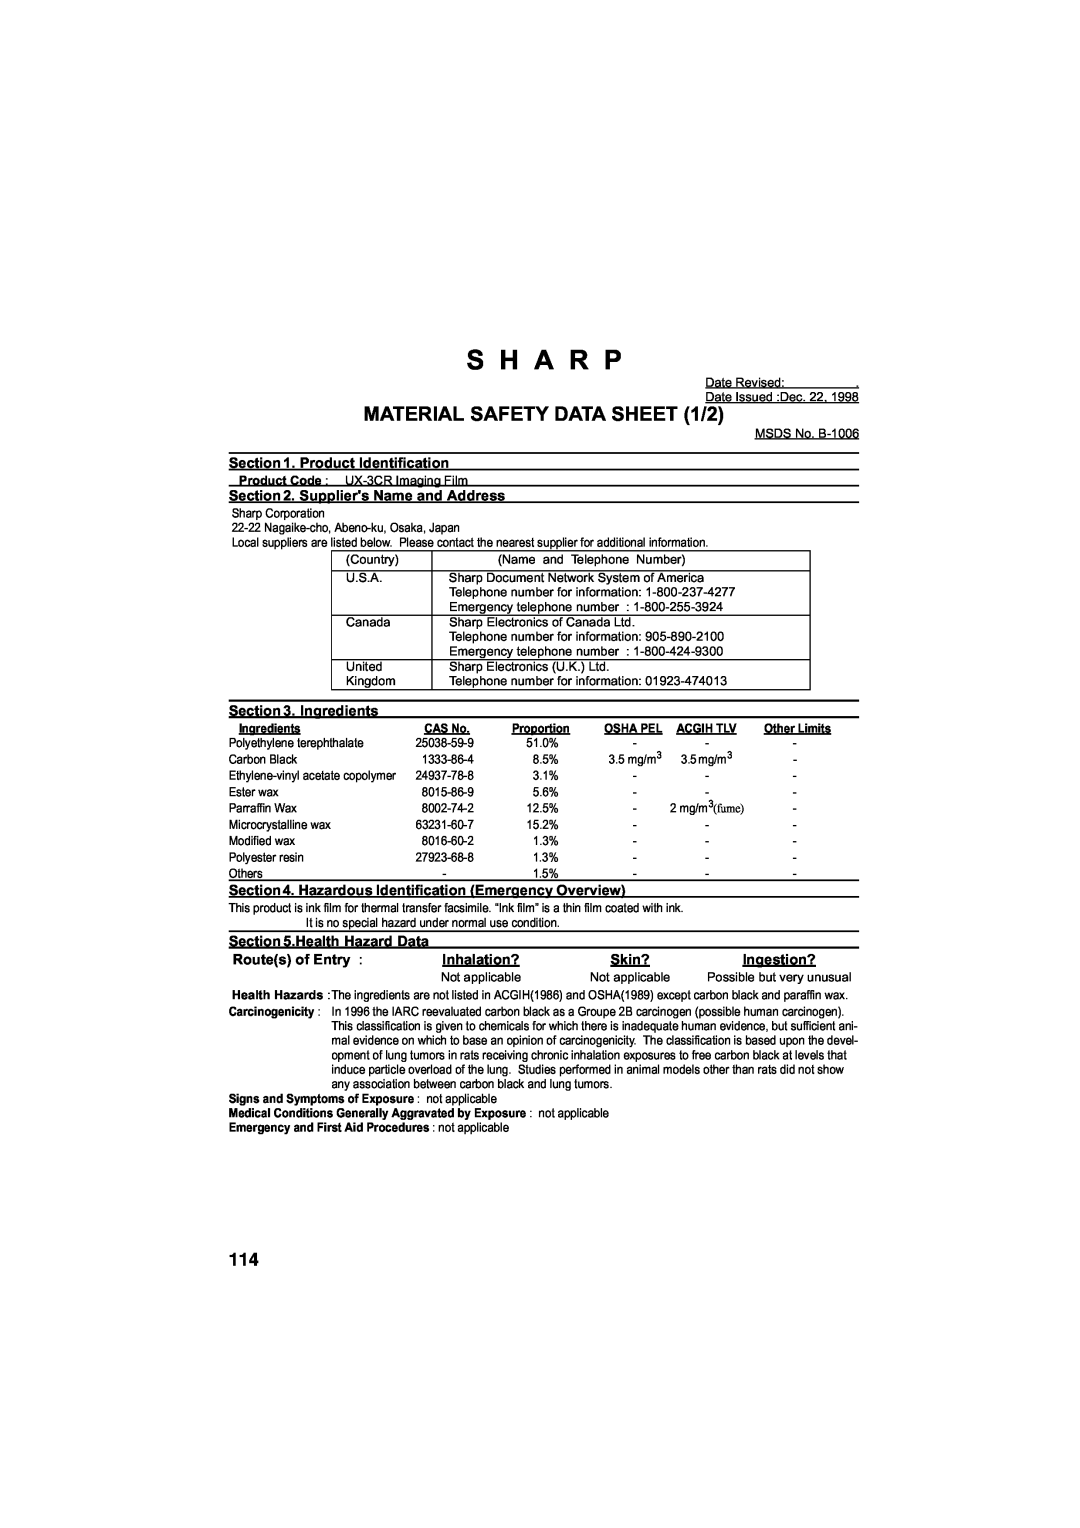 Sharp UX-340LM S H A R P, MATERIAL SAFETY DATA SHEET 1/2, Product Identification, Suppliers Name and Address, Ingredients 